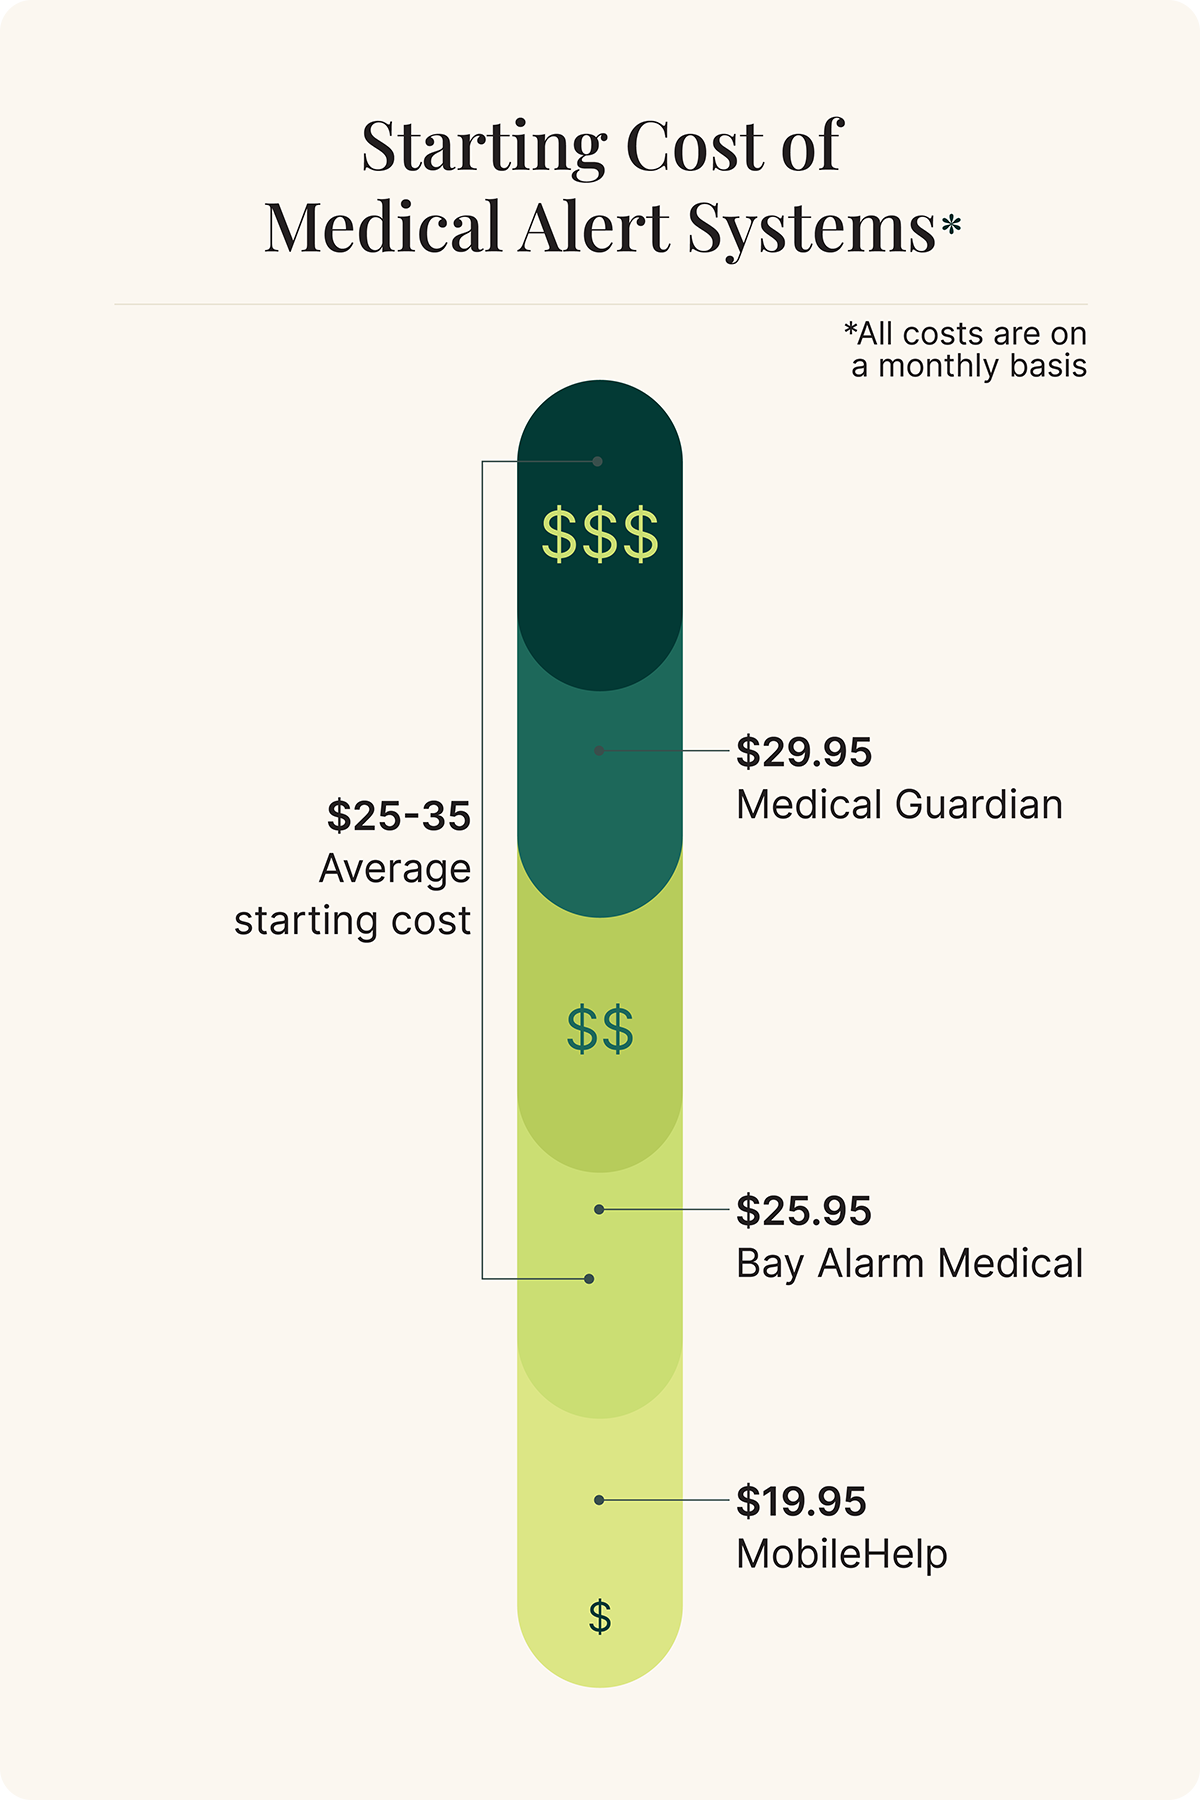 Starting Cost of Medical Alert Systems graphic